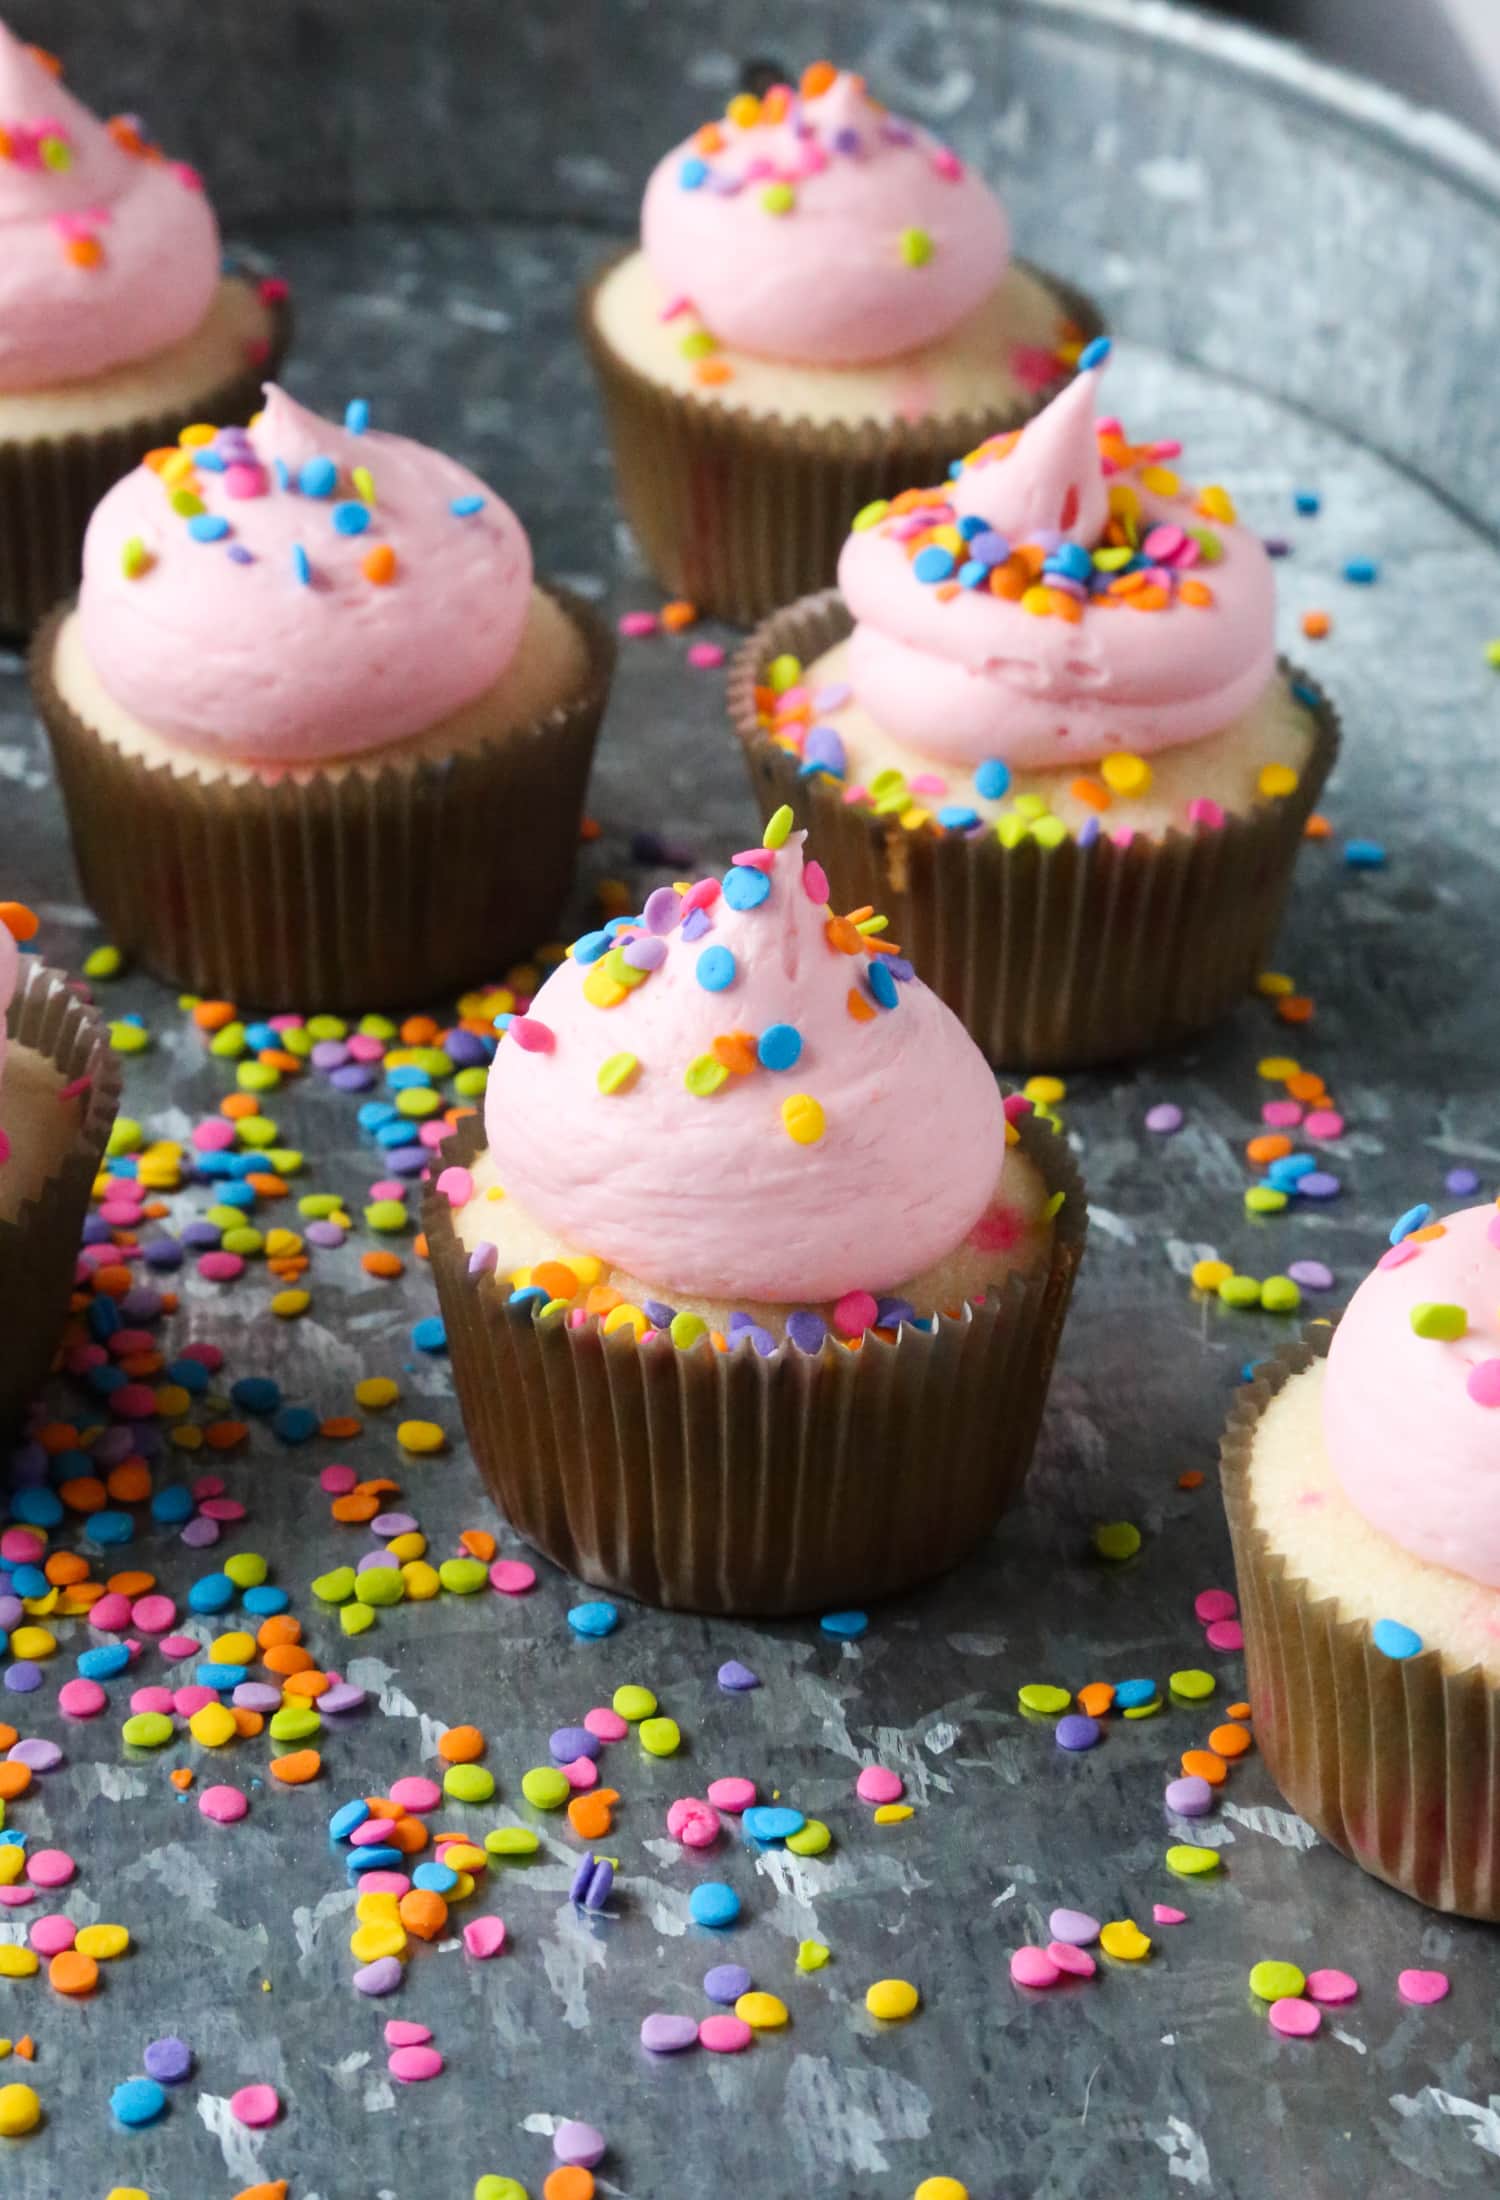 Confetti cupcakes with pink frosting and sprinkles on a sprinkle-covered tray